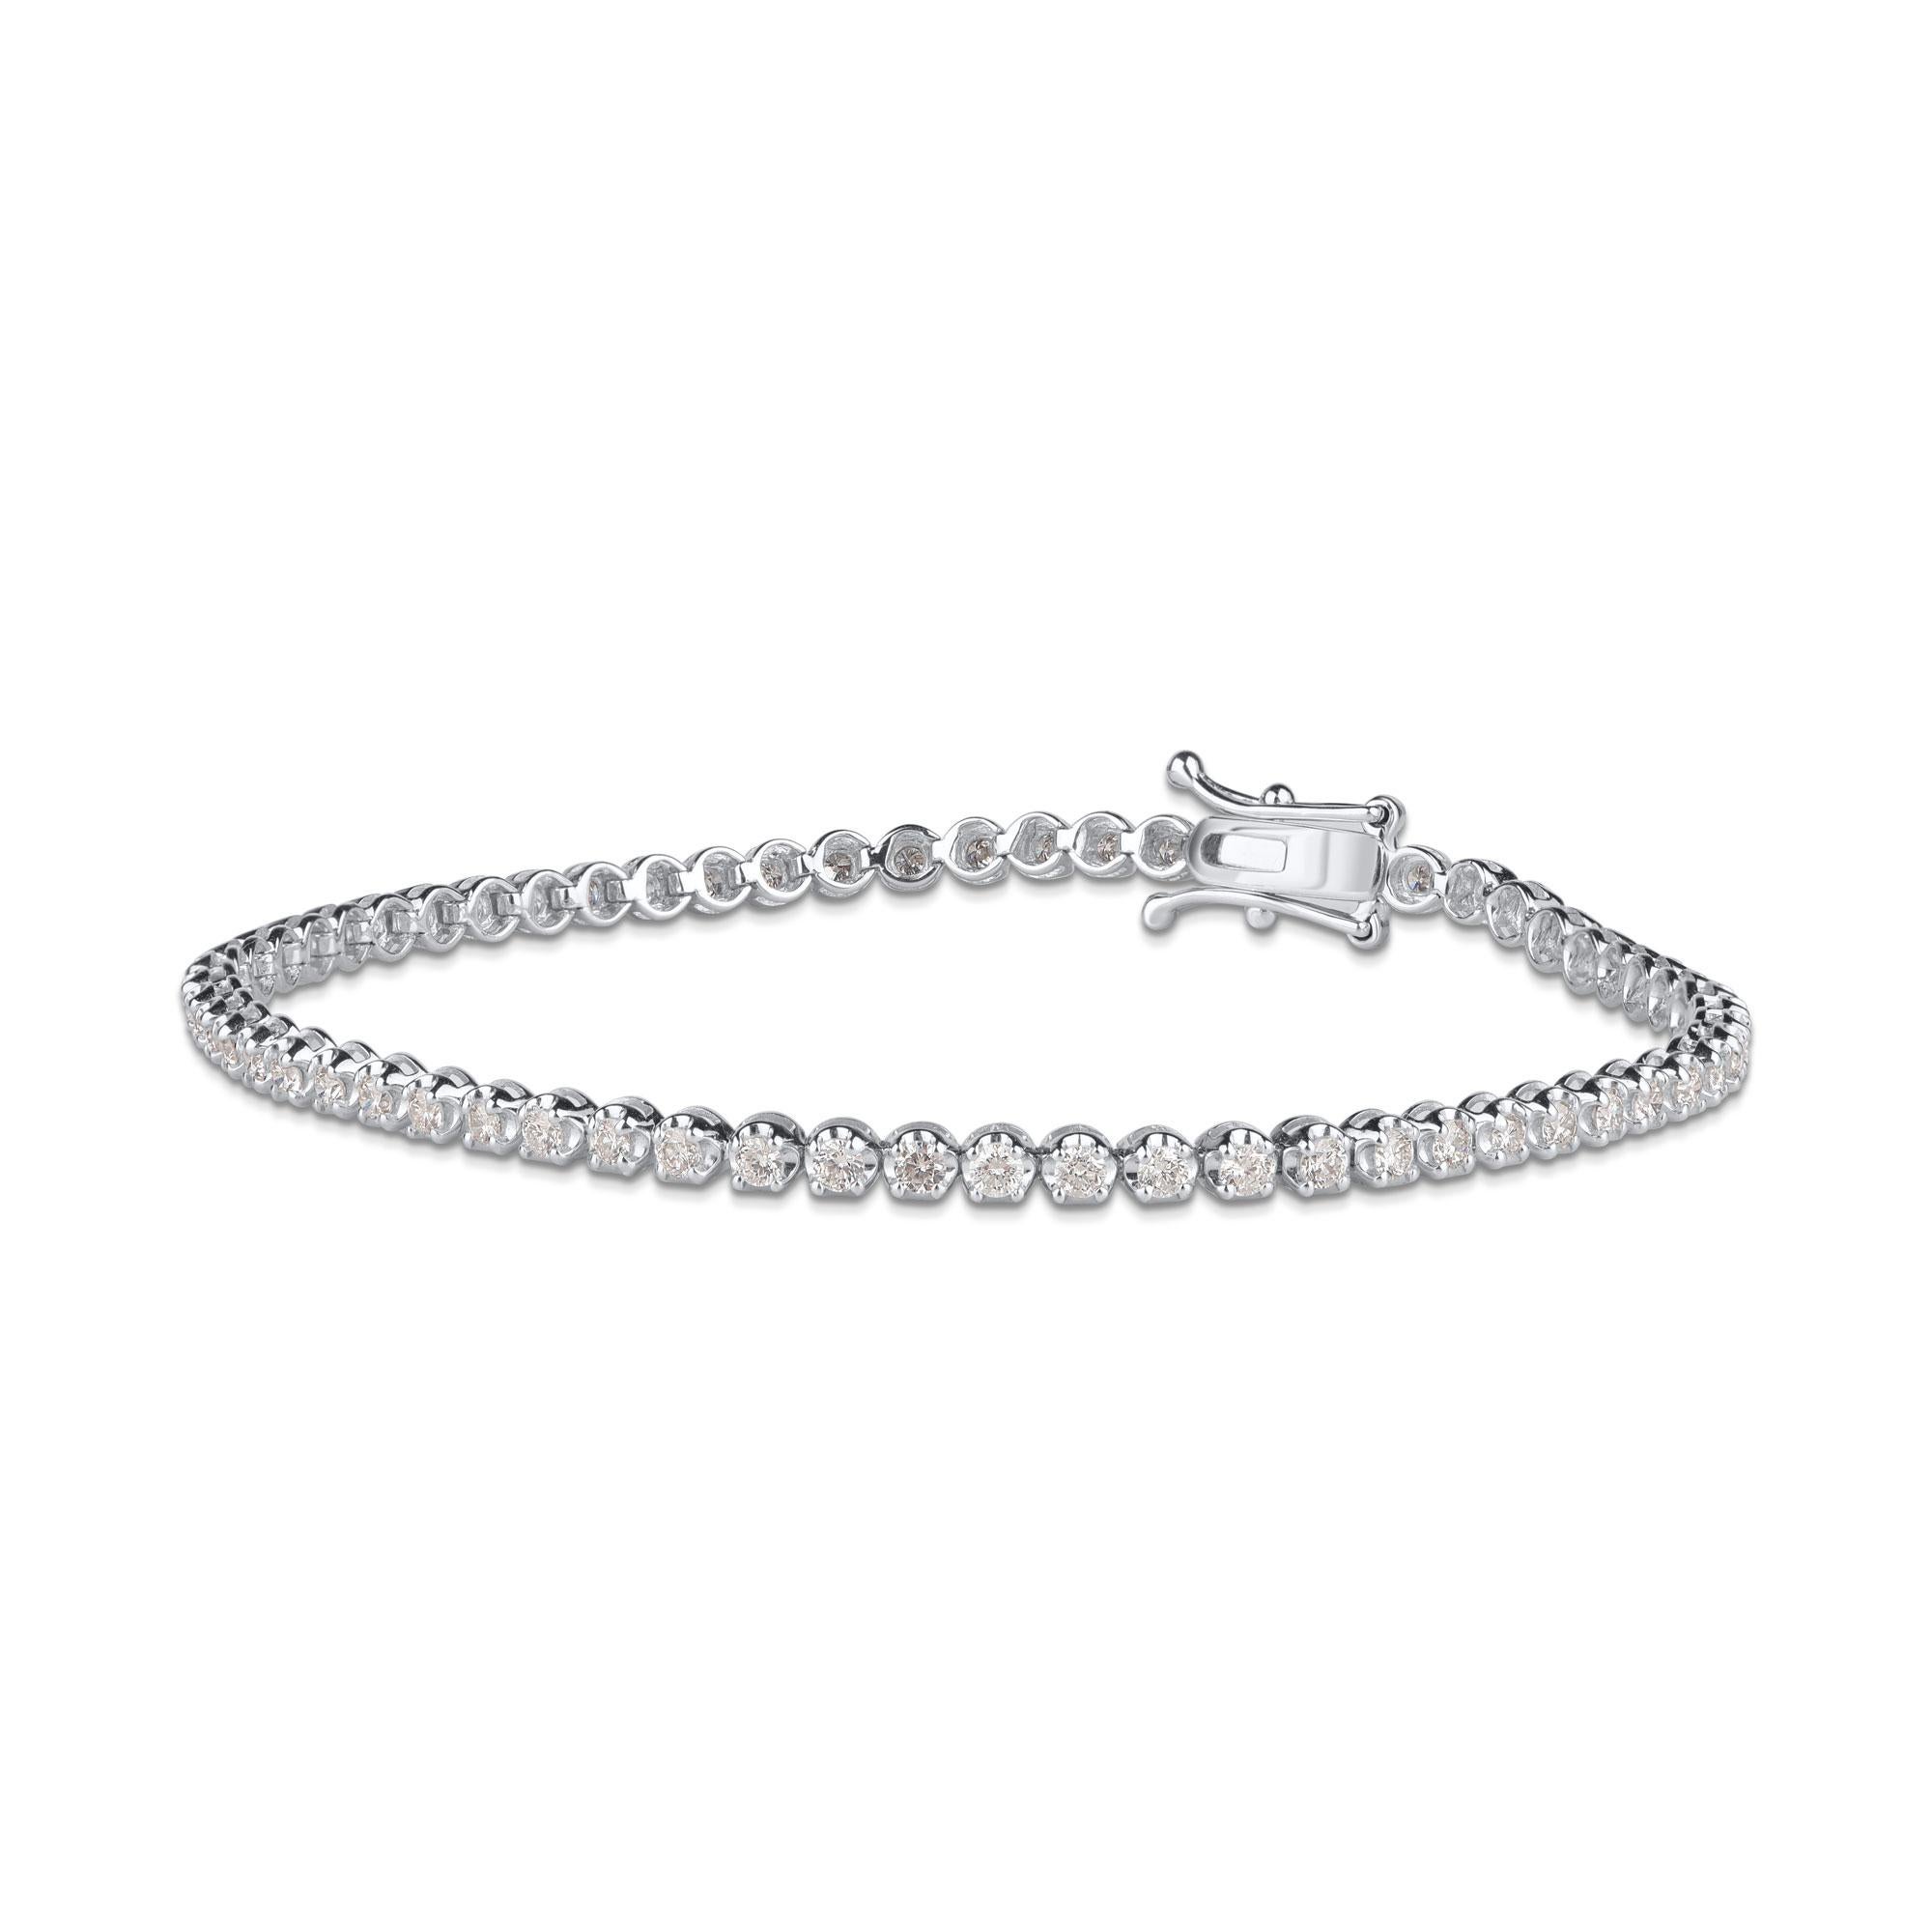 Stunning and elegant, this diamond tennis bracelet is studded with 62 round diamonds in prong setting and crafted in 18 KT white gold. Diamonds are graded HI color, SI3 clarity. 